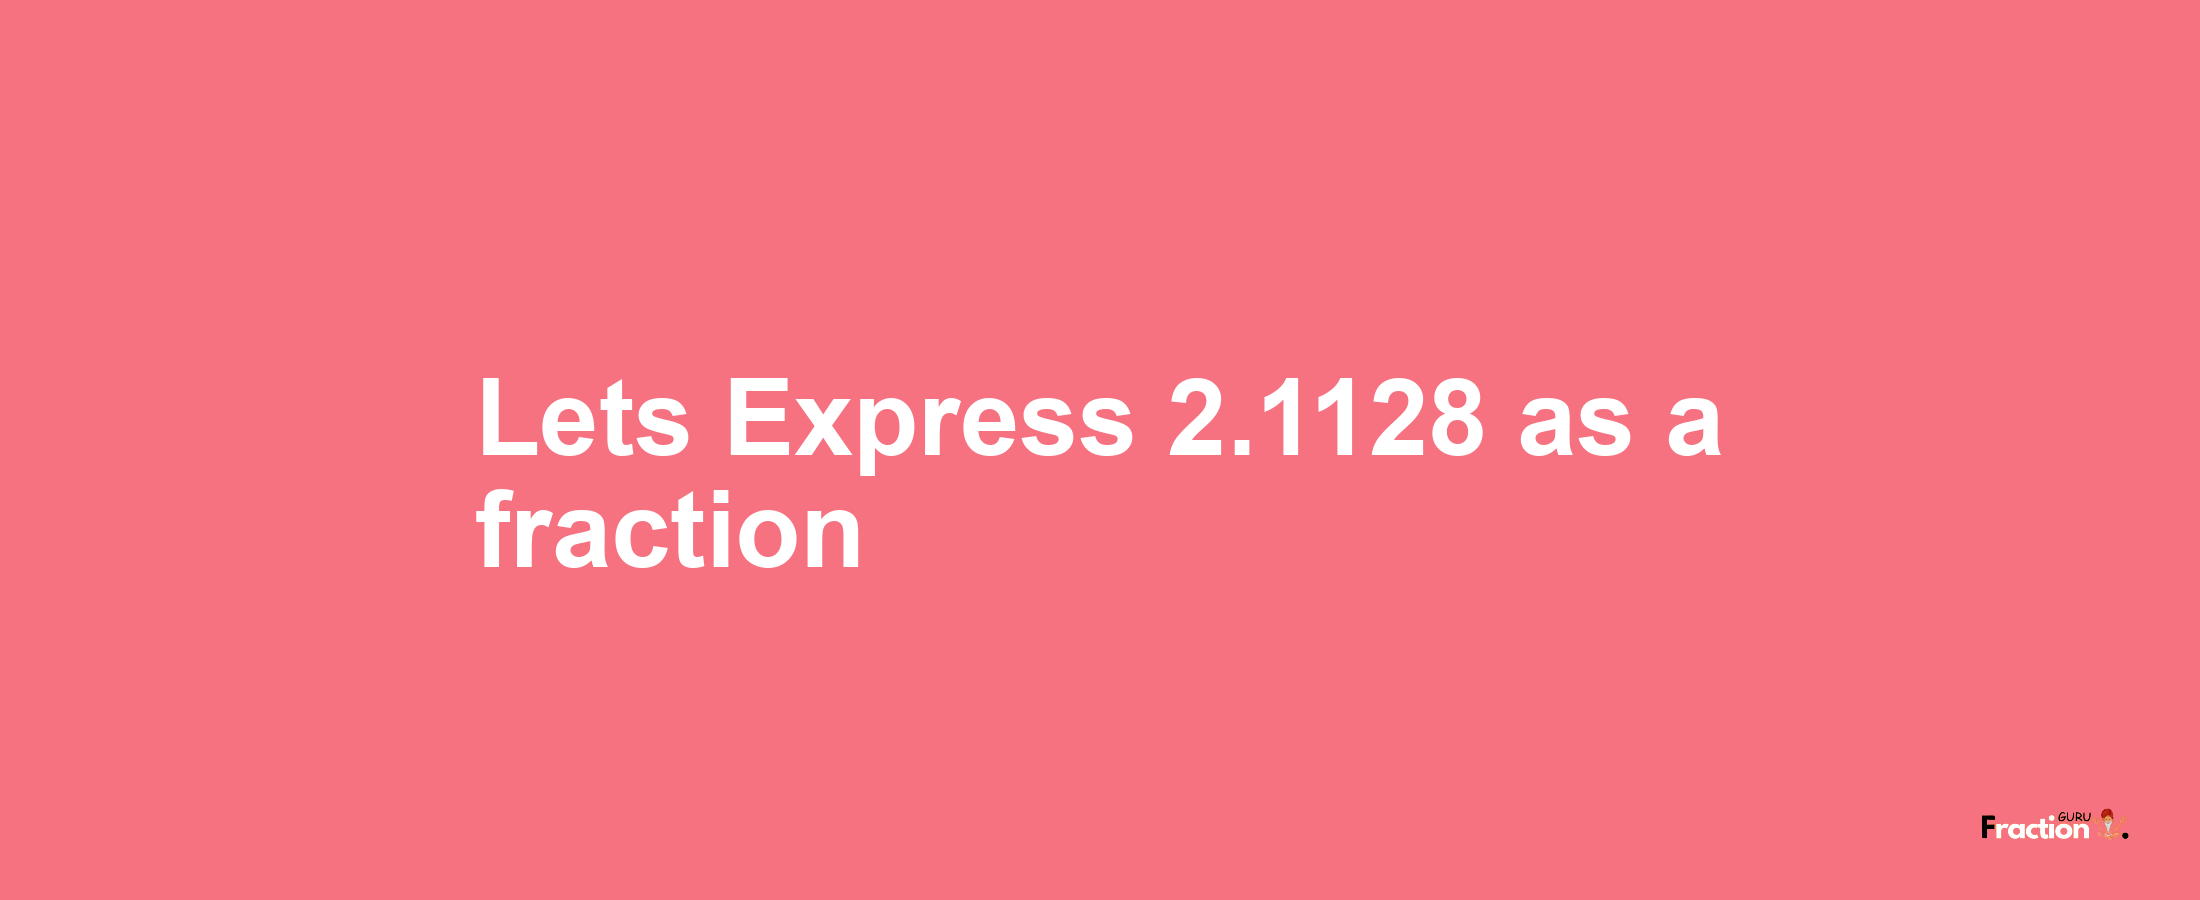 Lets Express 2.1128 as afraction